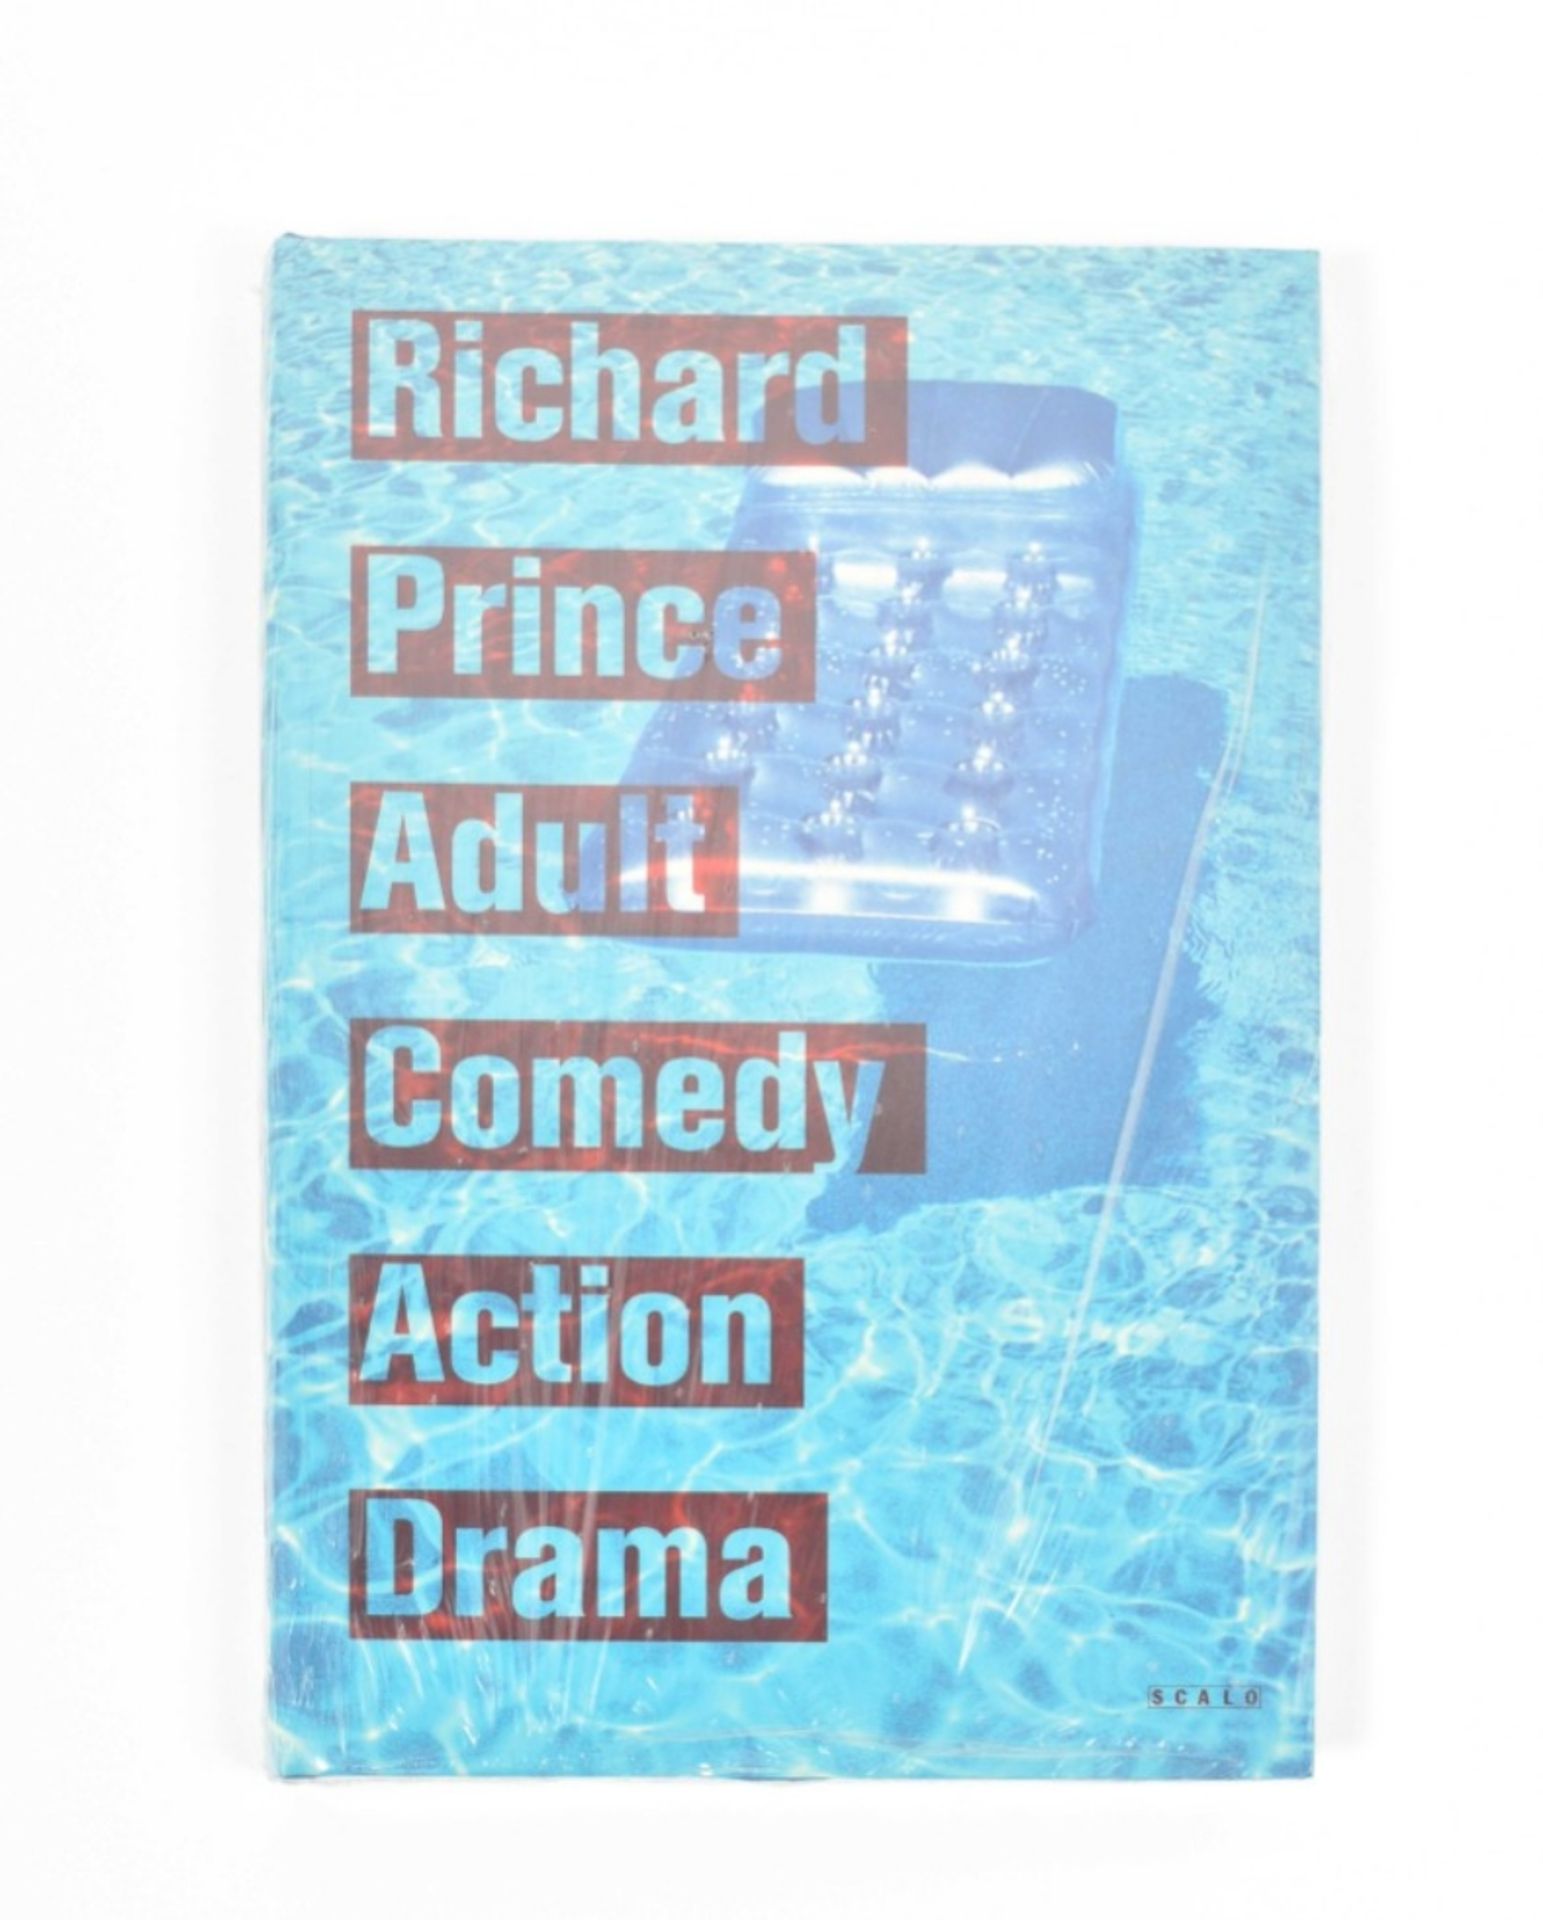 [s and up] Richard Prince. Adult Comedy Action Drama